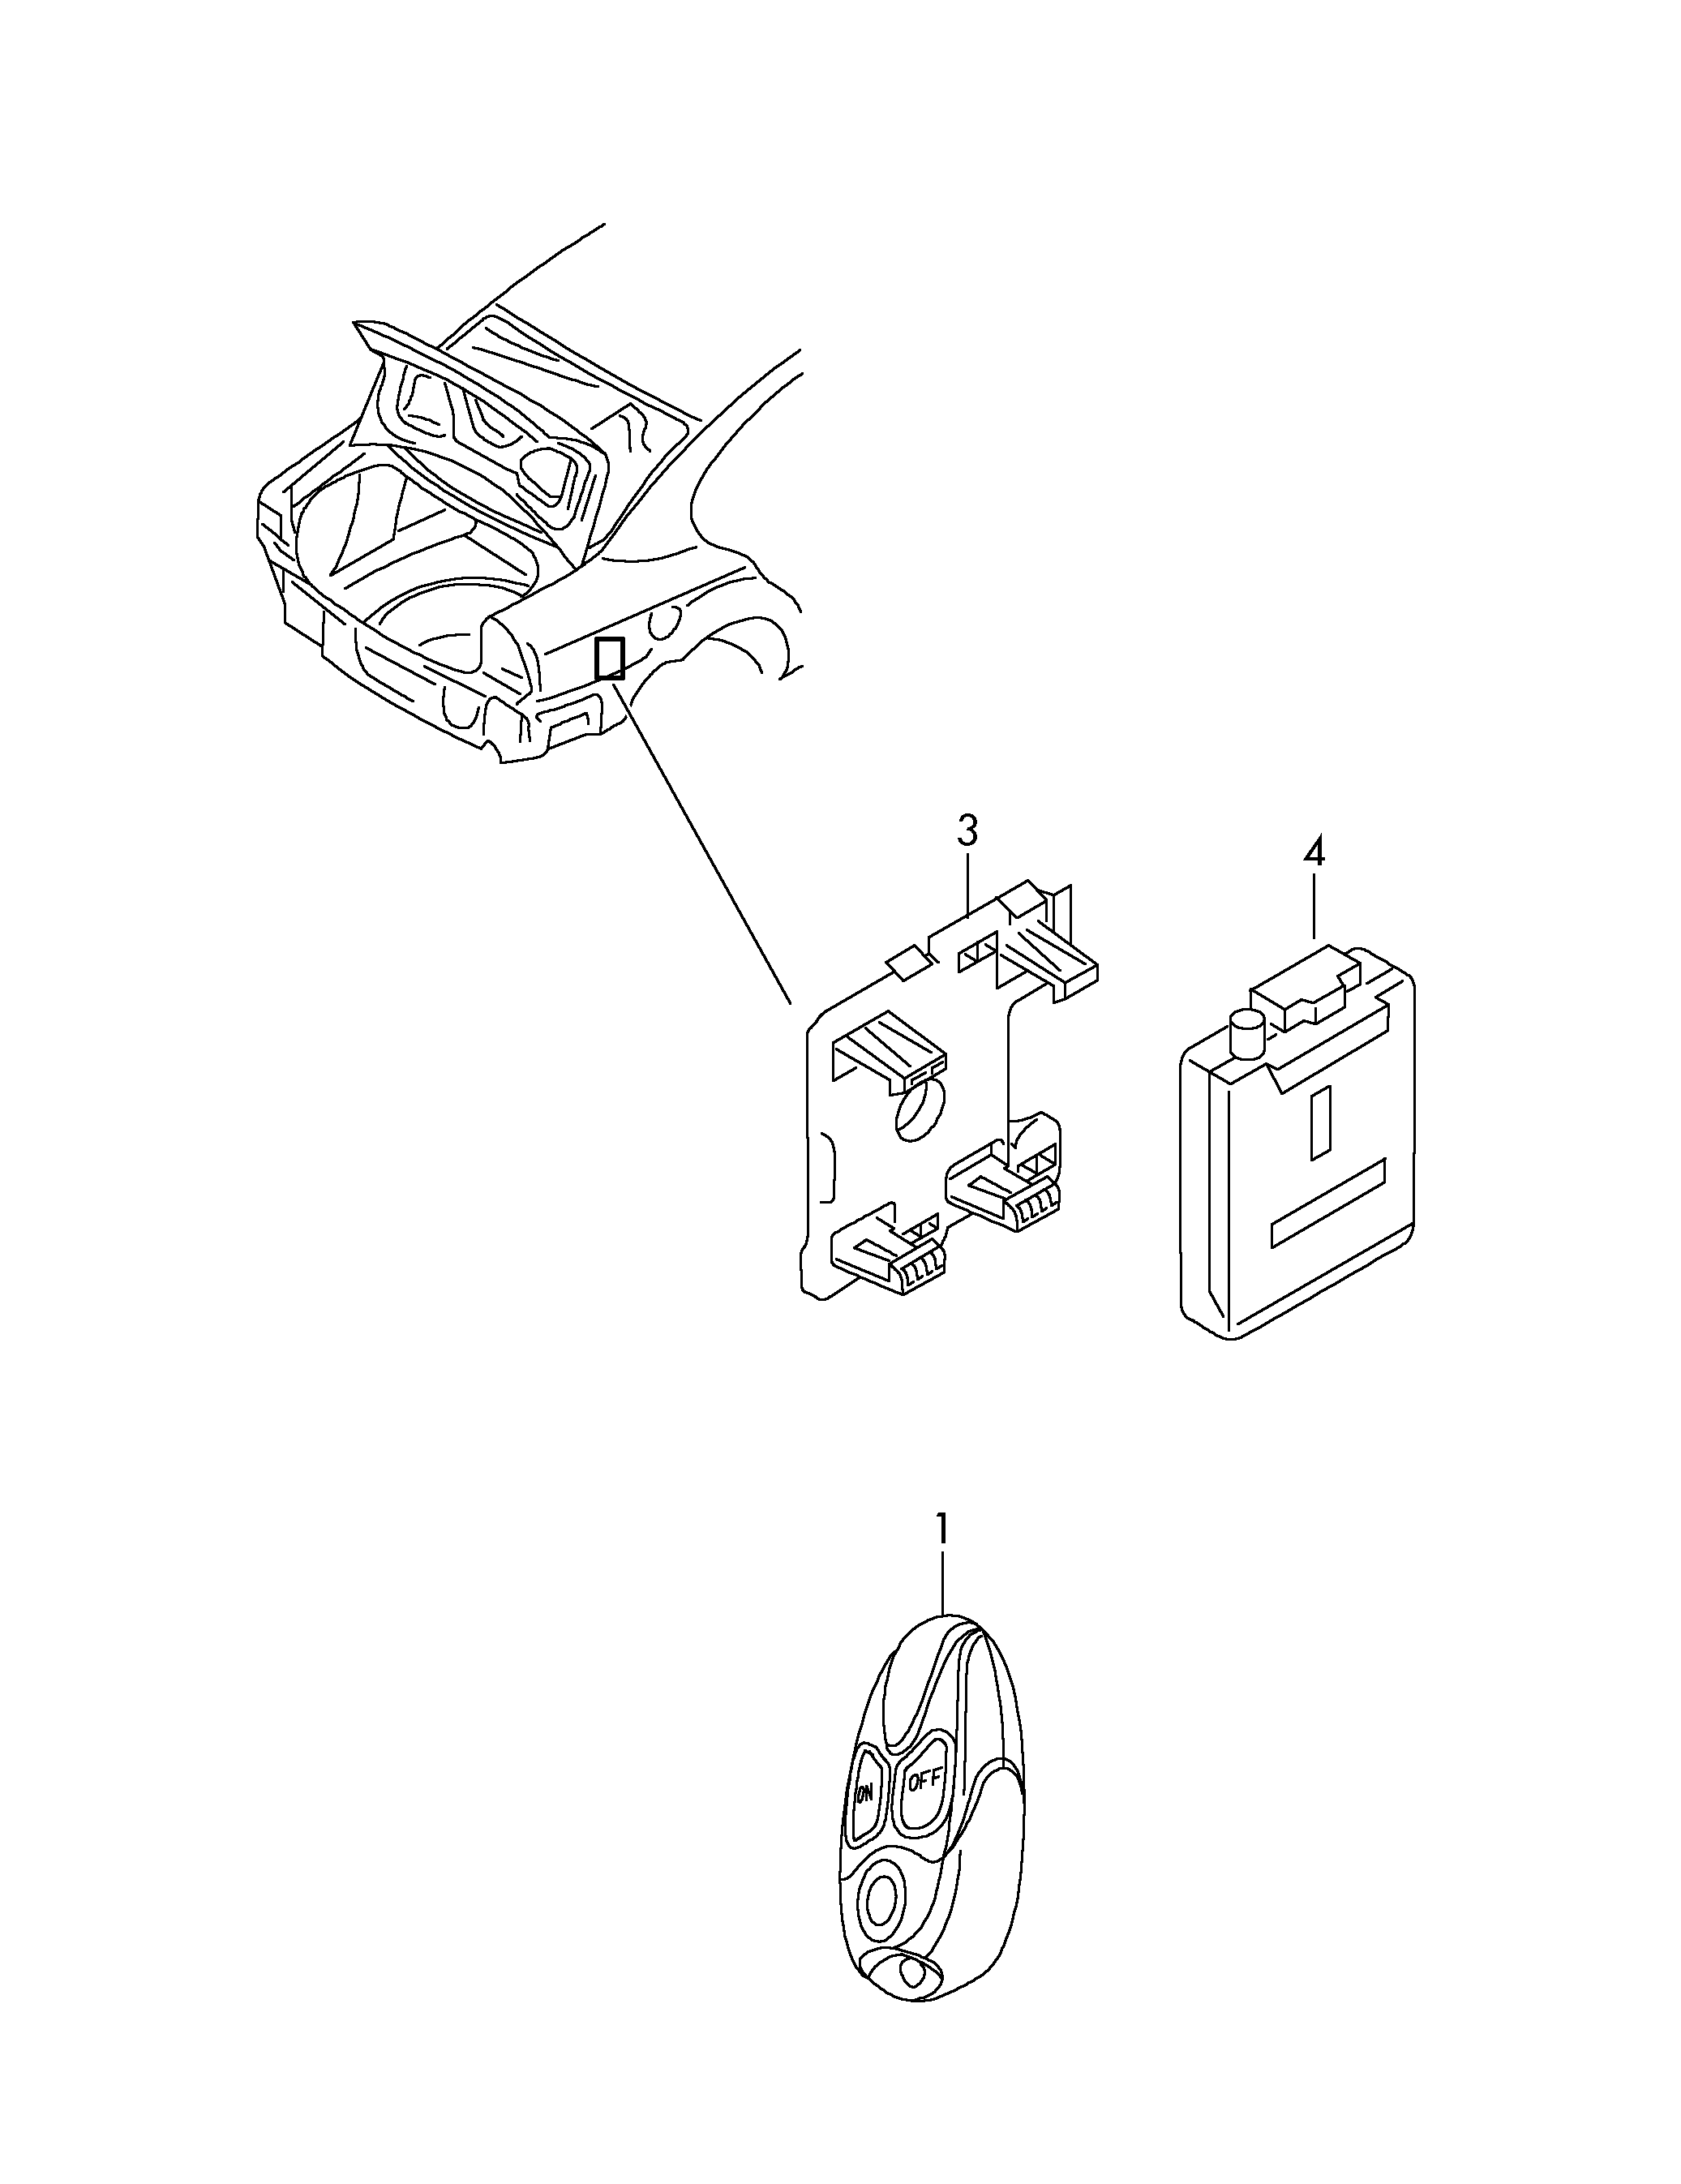 electrical parts for auxiliary<br>heater with remote control  - Octavia - oct